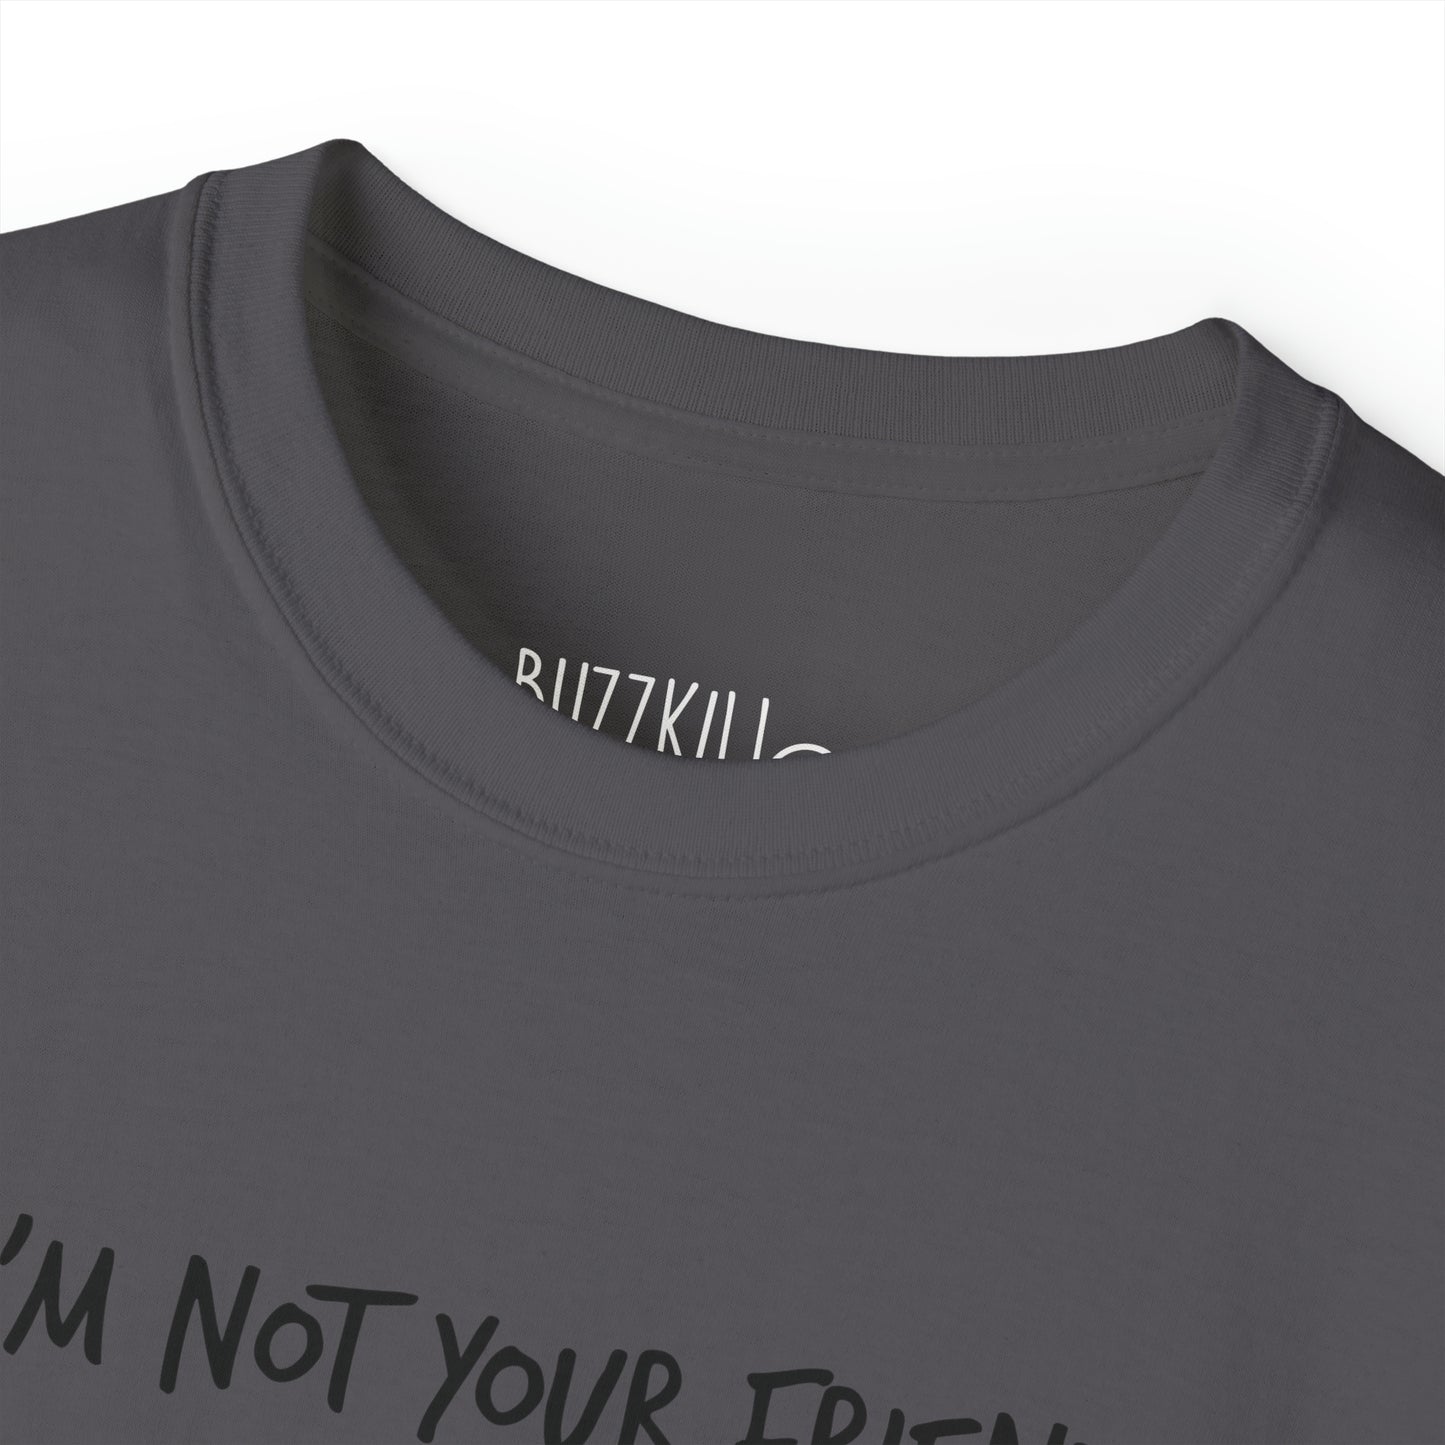 I'm Not Your Friend - Unisex Ultra Cotton Tee